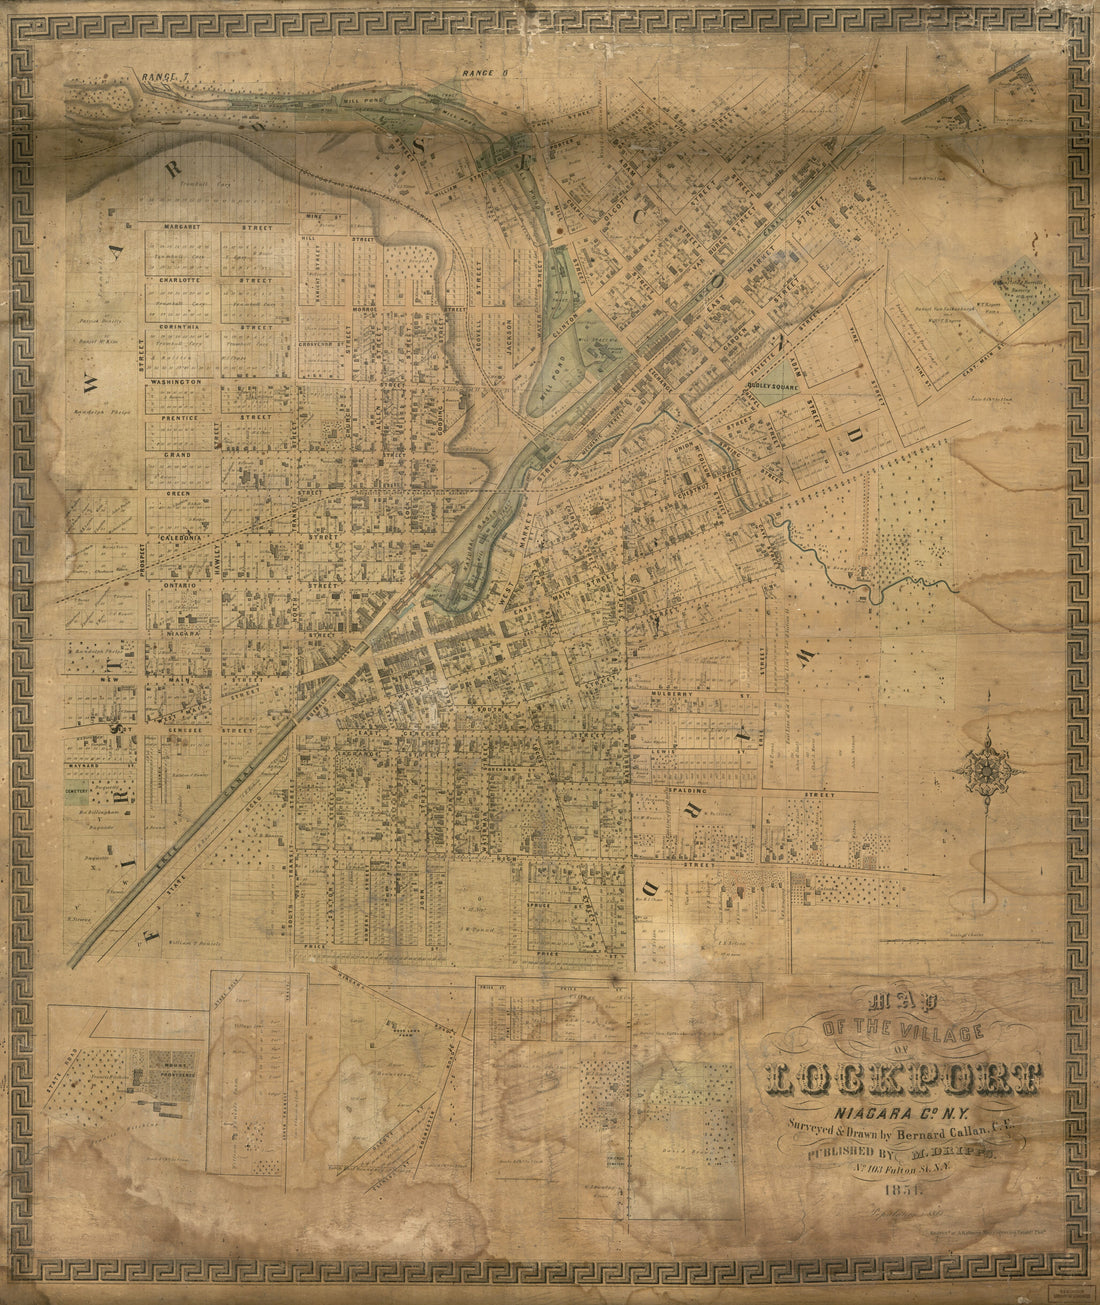 This old map of Map of the Village of Lockport, Niagara Co., New York (Map of the Village of Lockport, Niagara County, New York) from 1851 was created by Bernard Callan, M. (Matthew) Dripps, Augustus Kollner in 1851